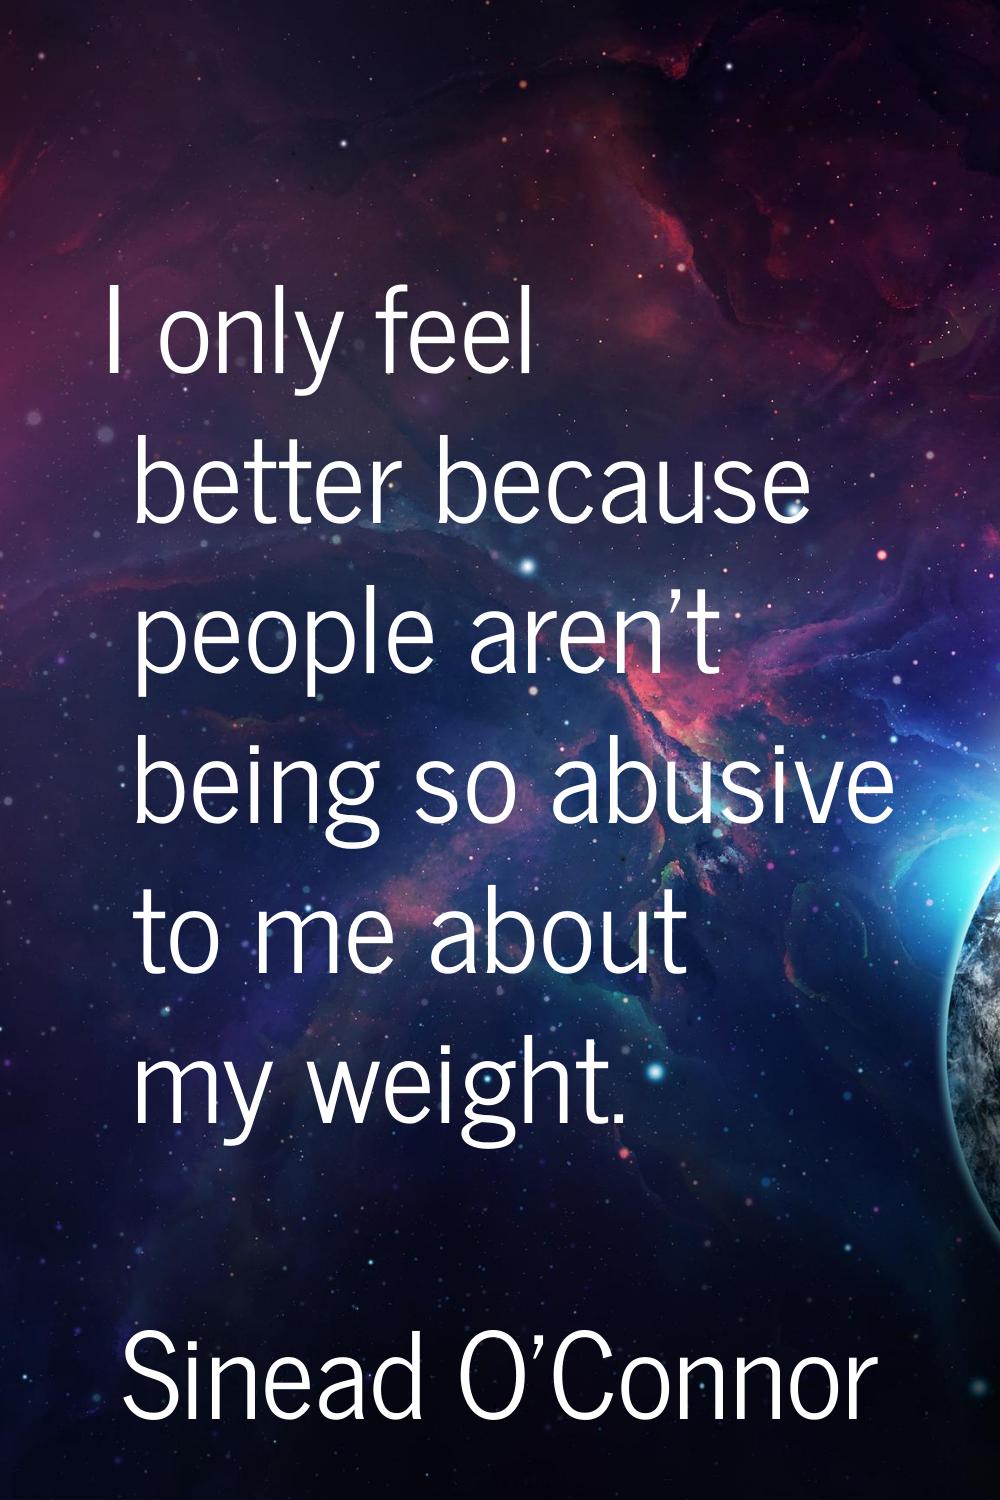 I only feel better because people aren't being so abusive to me about my weight.